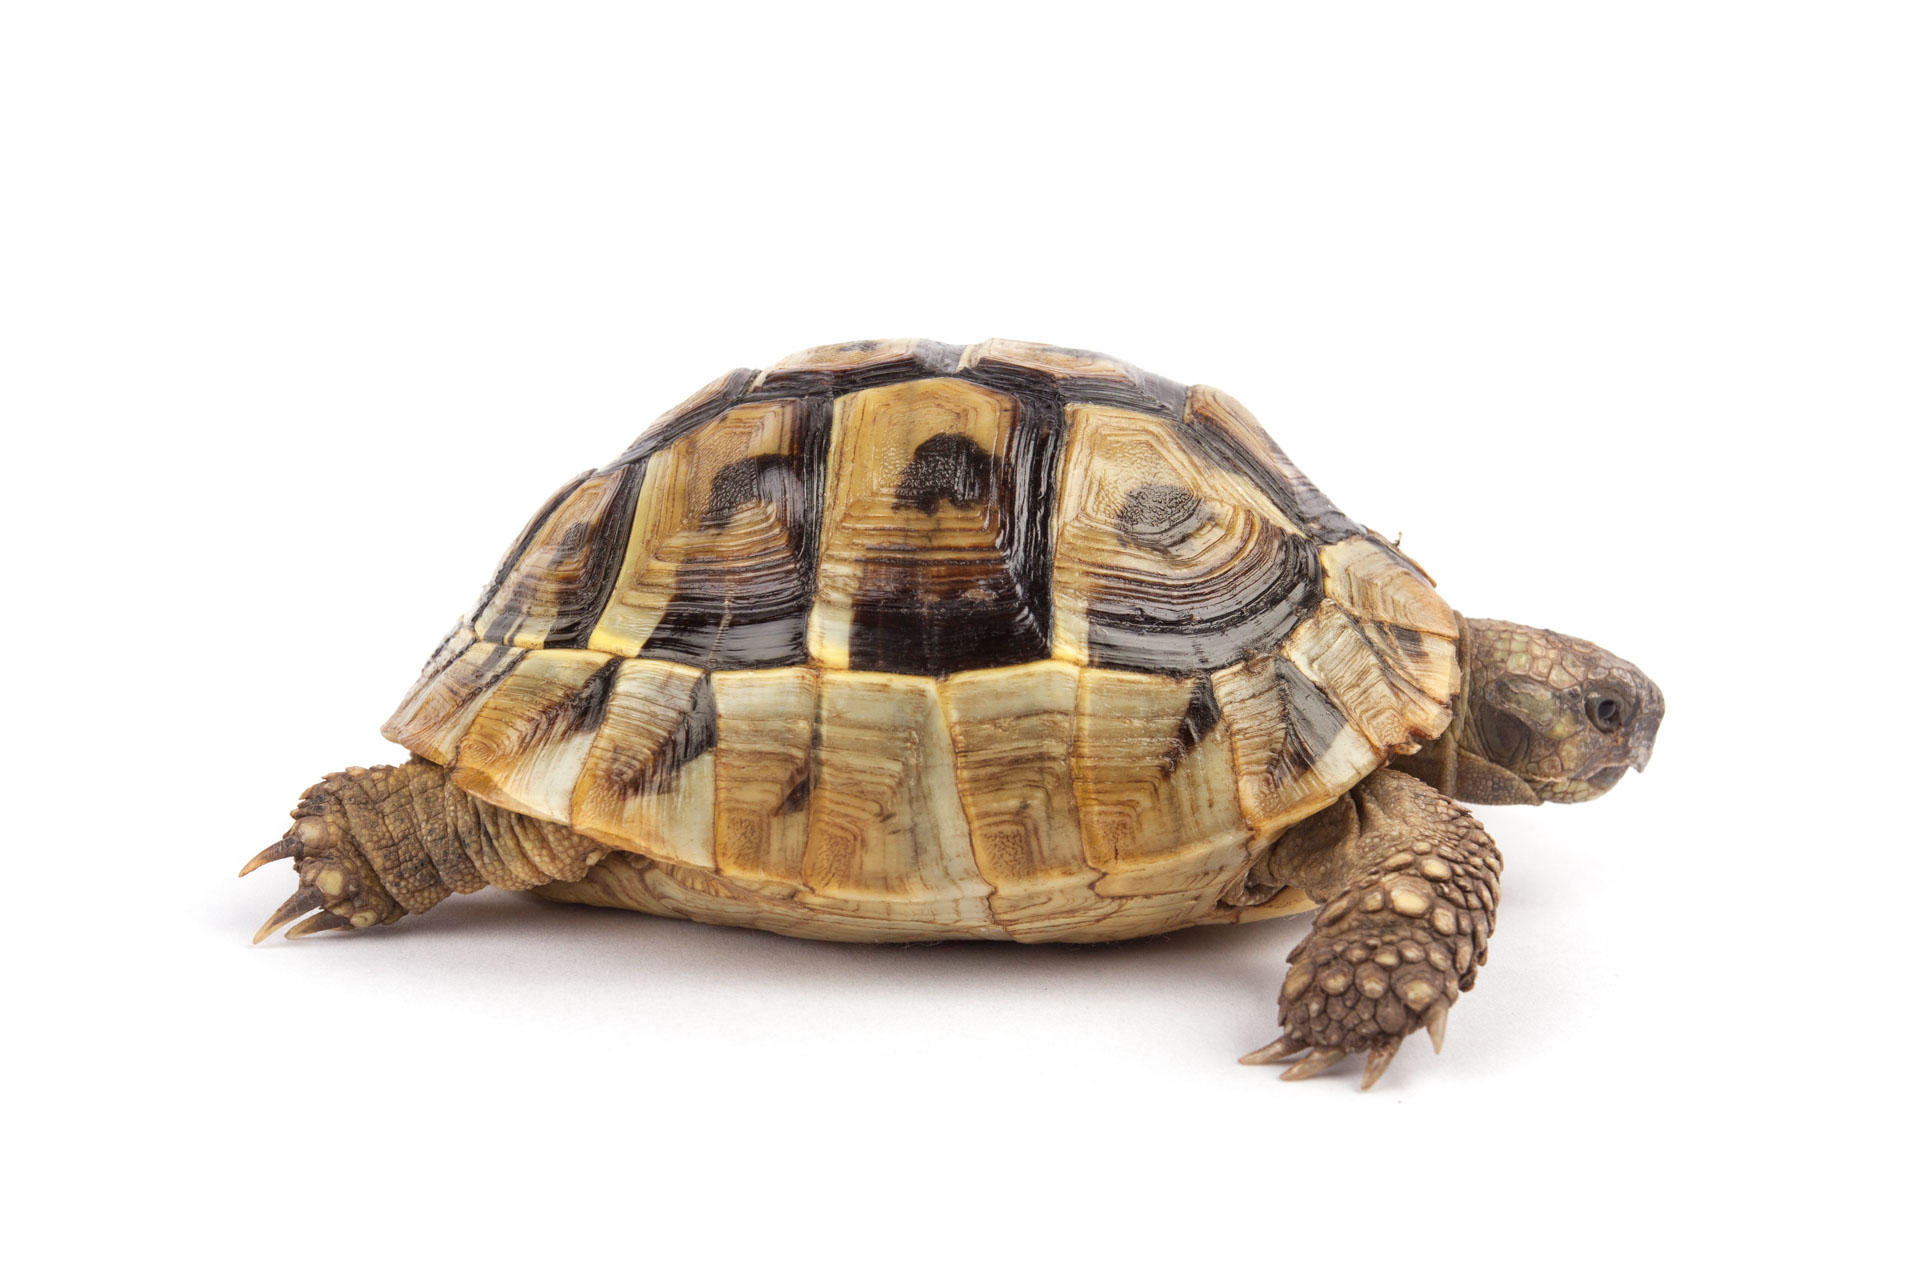 A Turtle Signifying Slowness